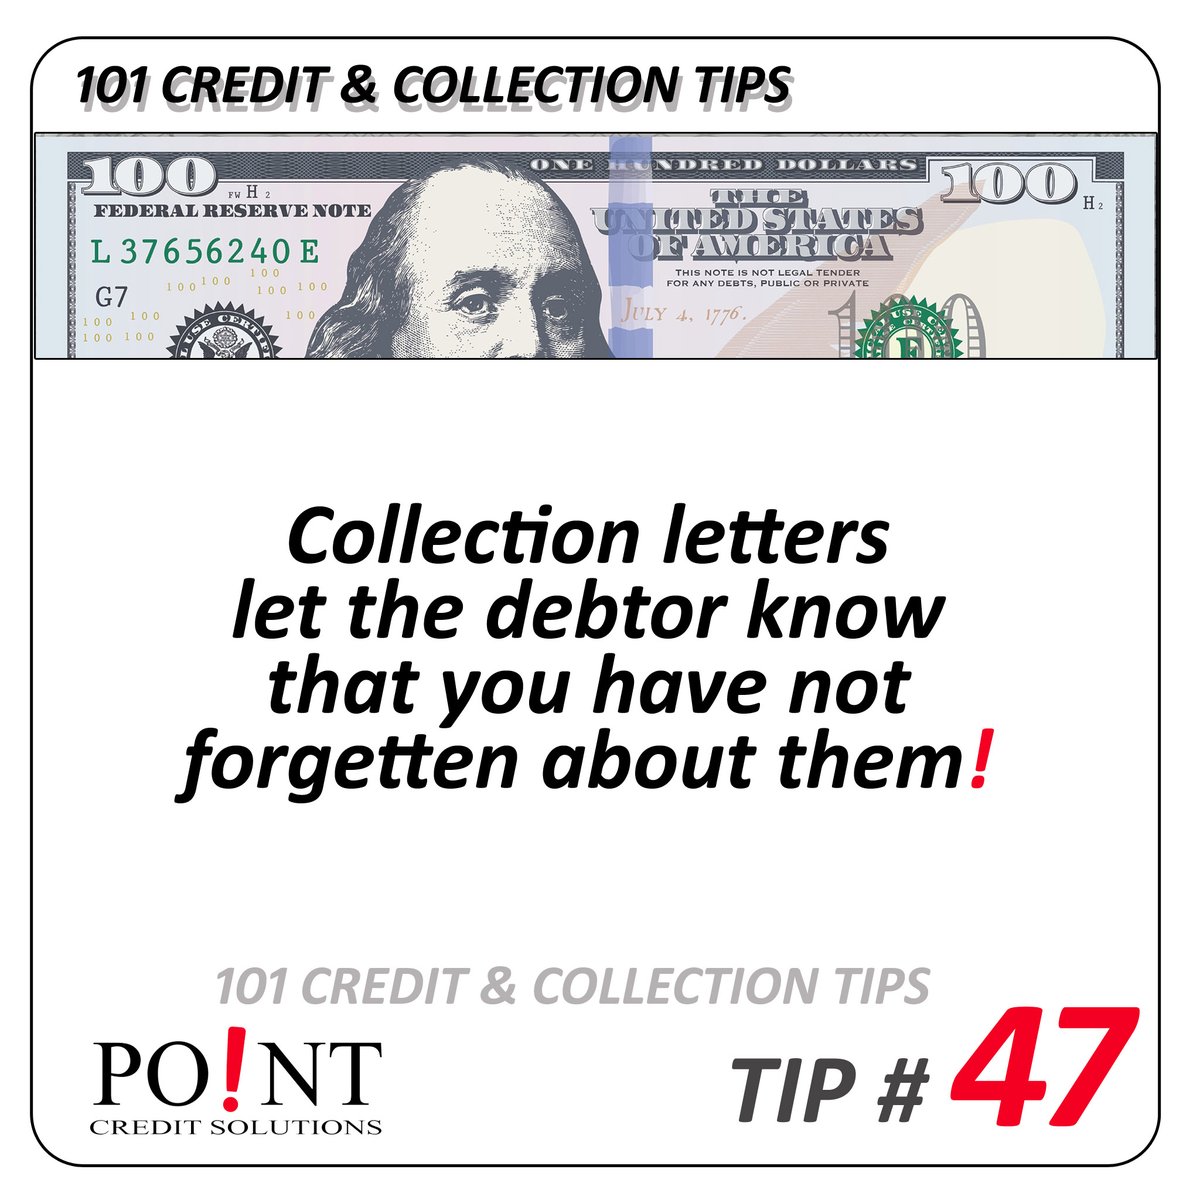 Find more tips here -> zcu.io/PmSO
#PointCredit #CollectionTips #Debt #DebtCollection #Attention